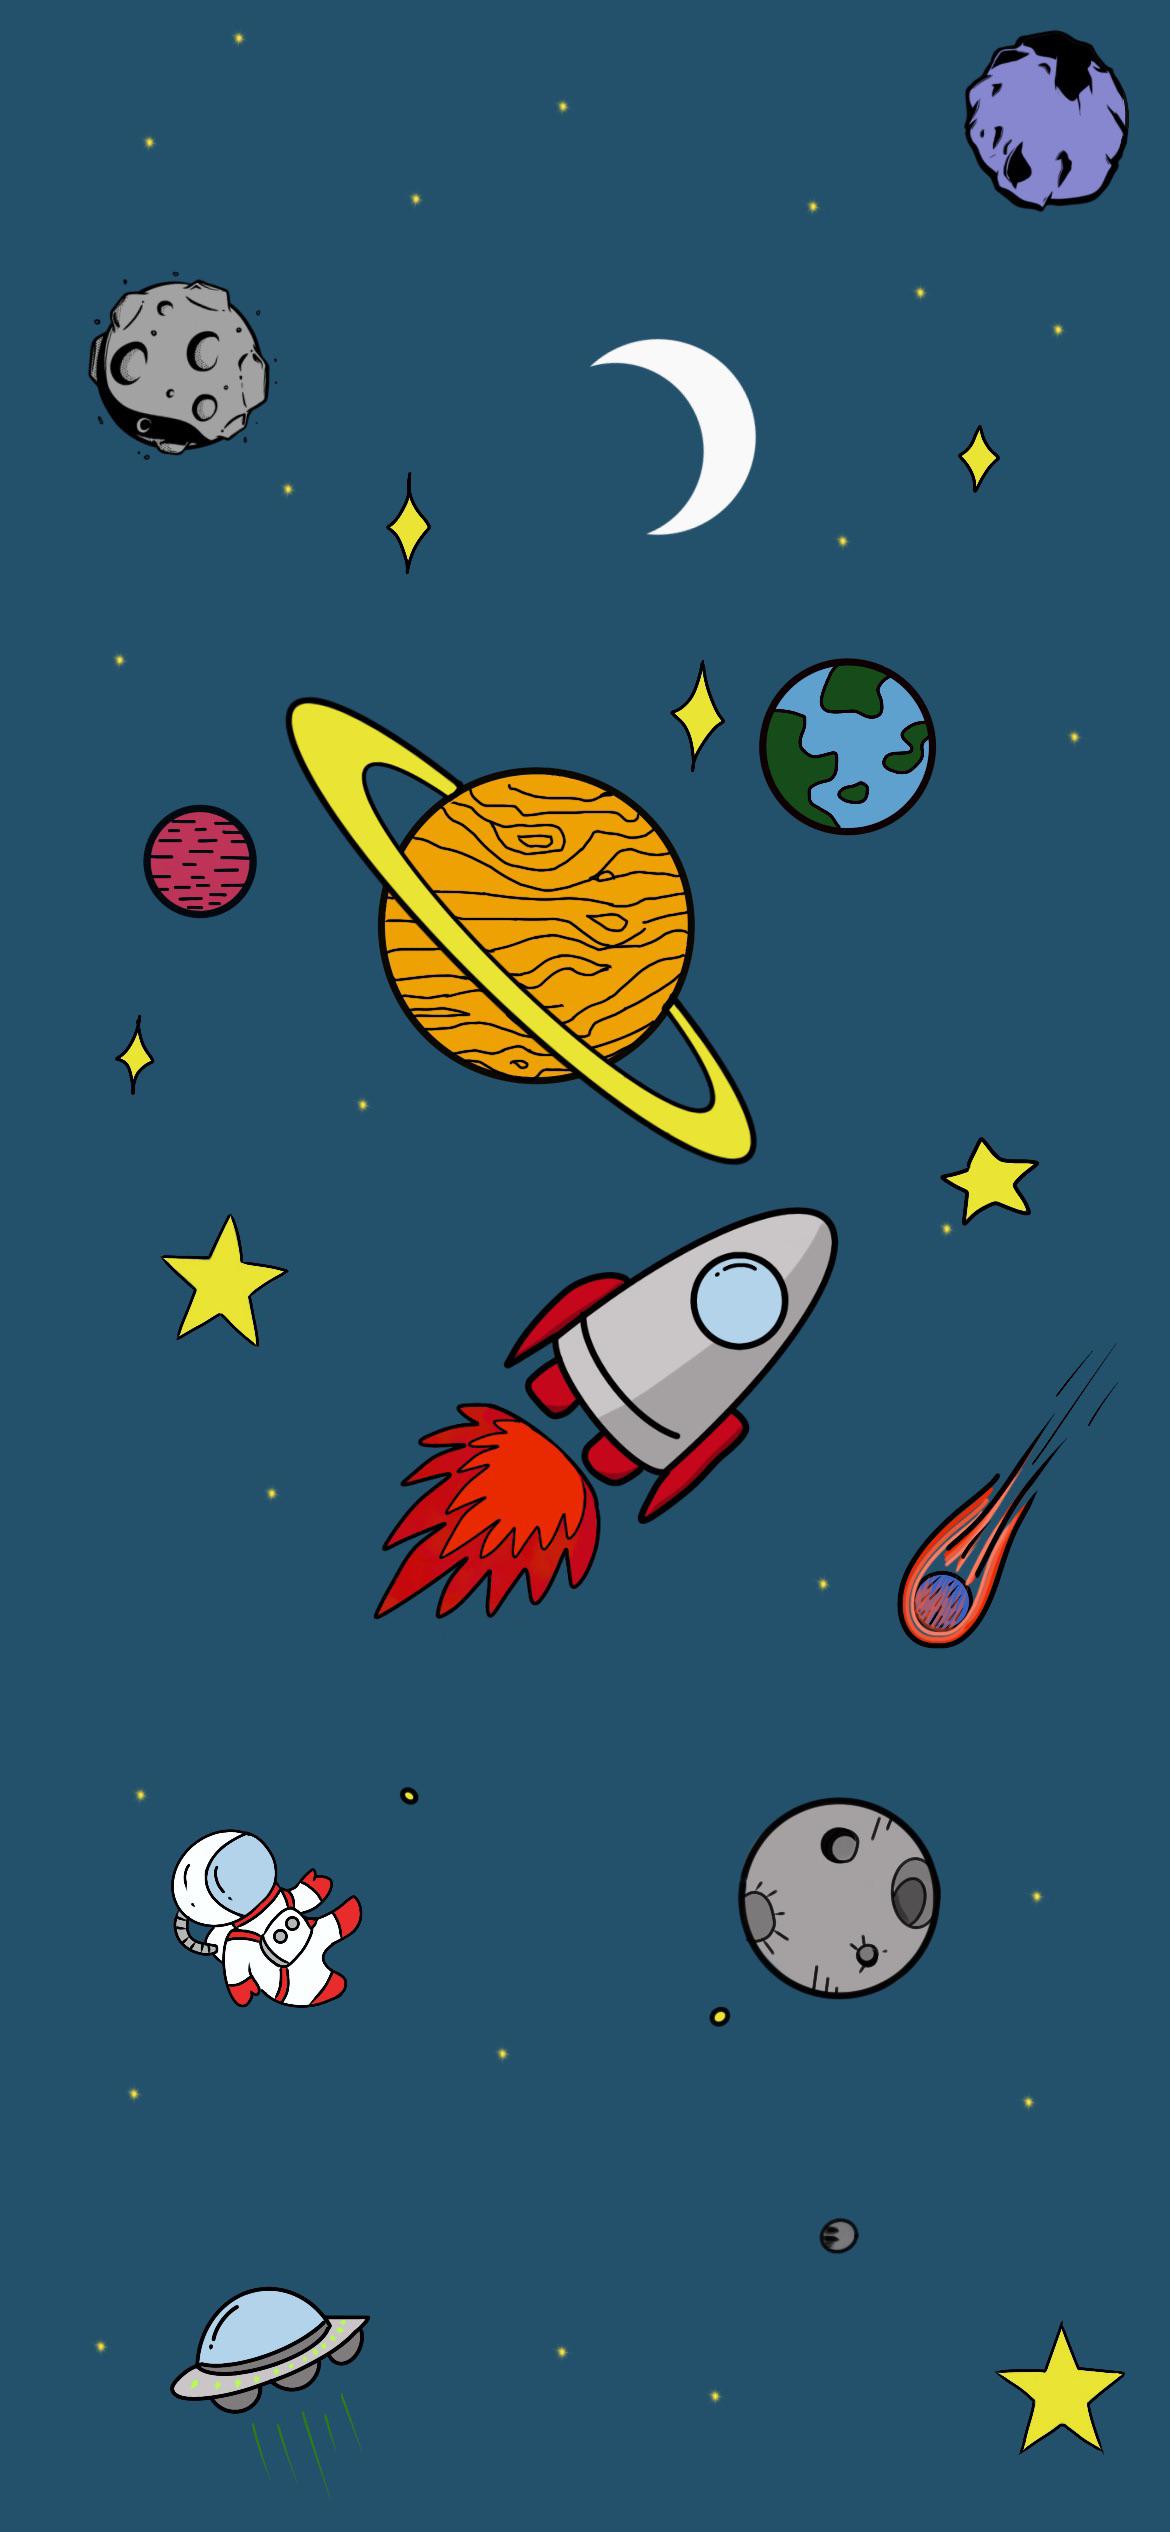 Simple space art smartphone wallpaper made by me resized